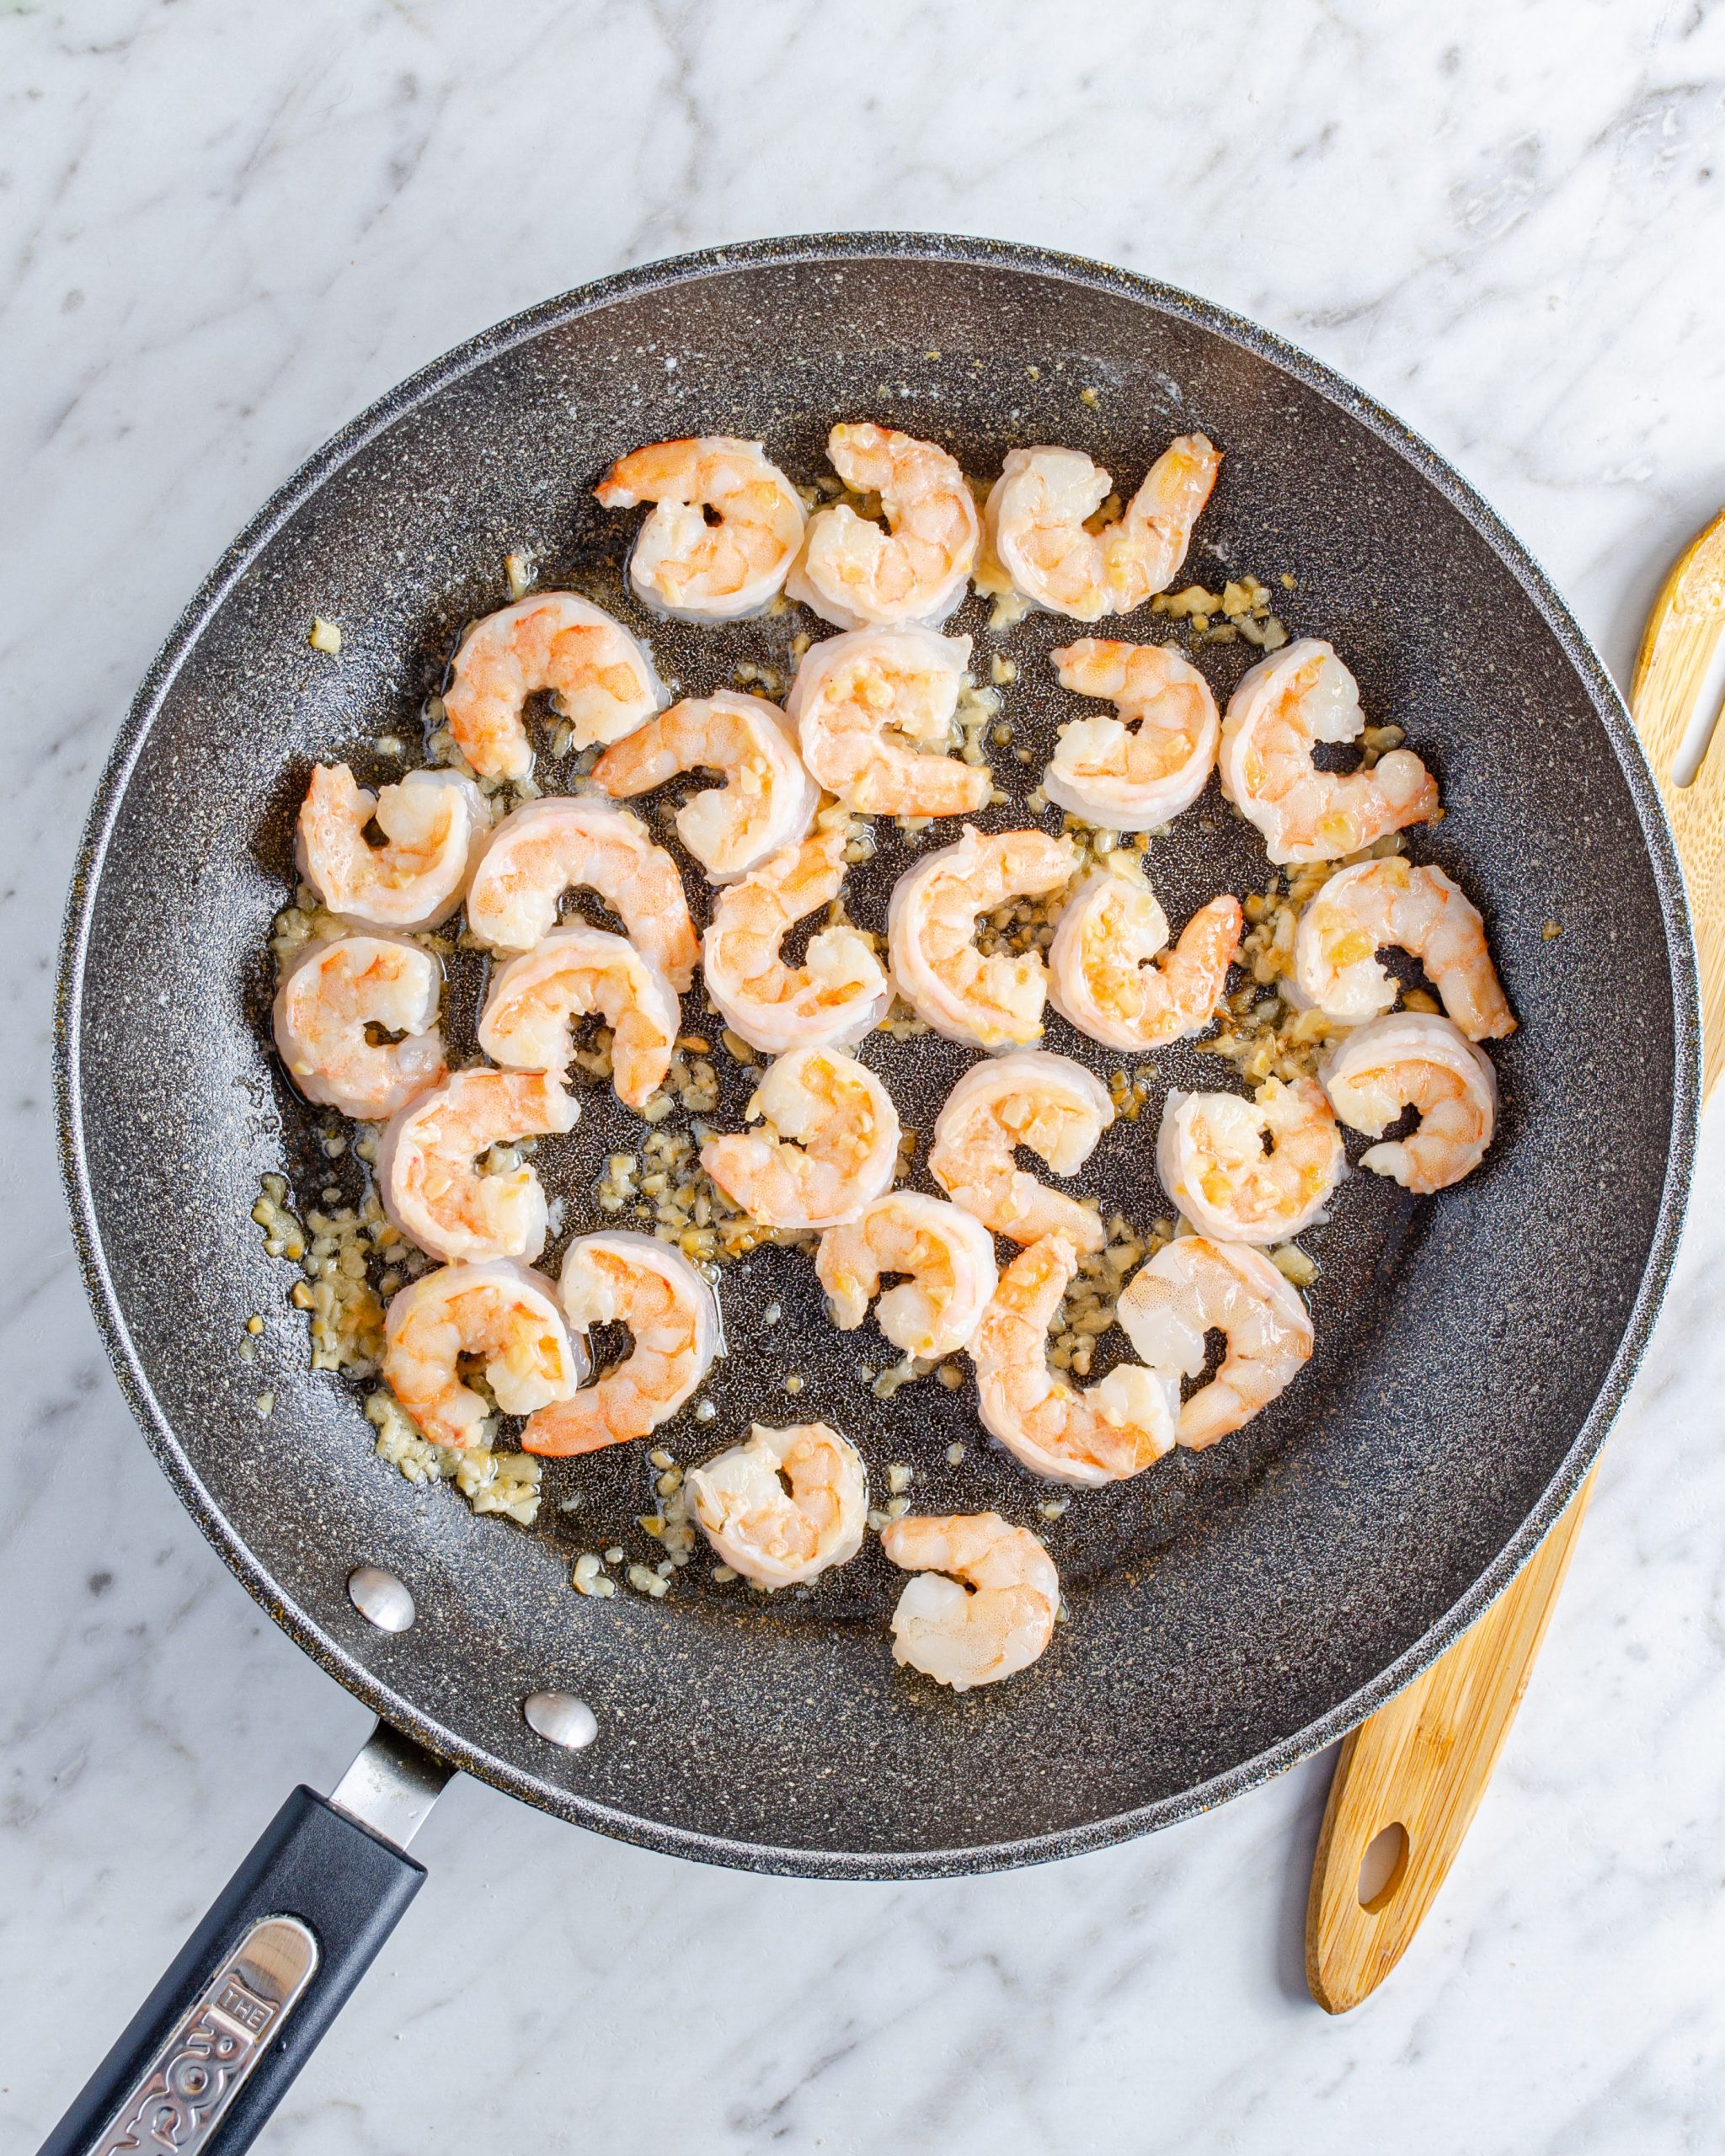 Add the shrimp to the skillet, and saute until cooked through. Season with salt and pepper to taste.